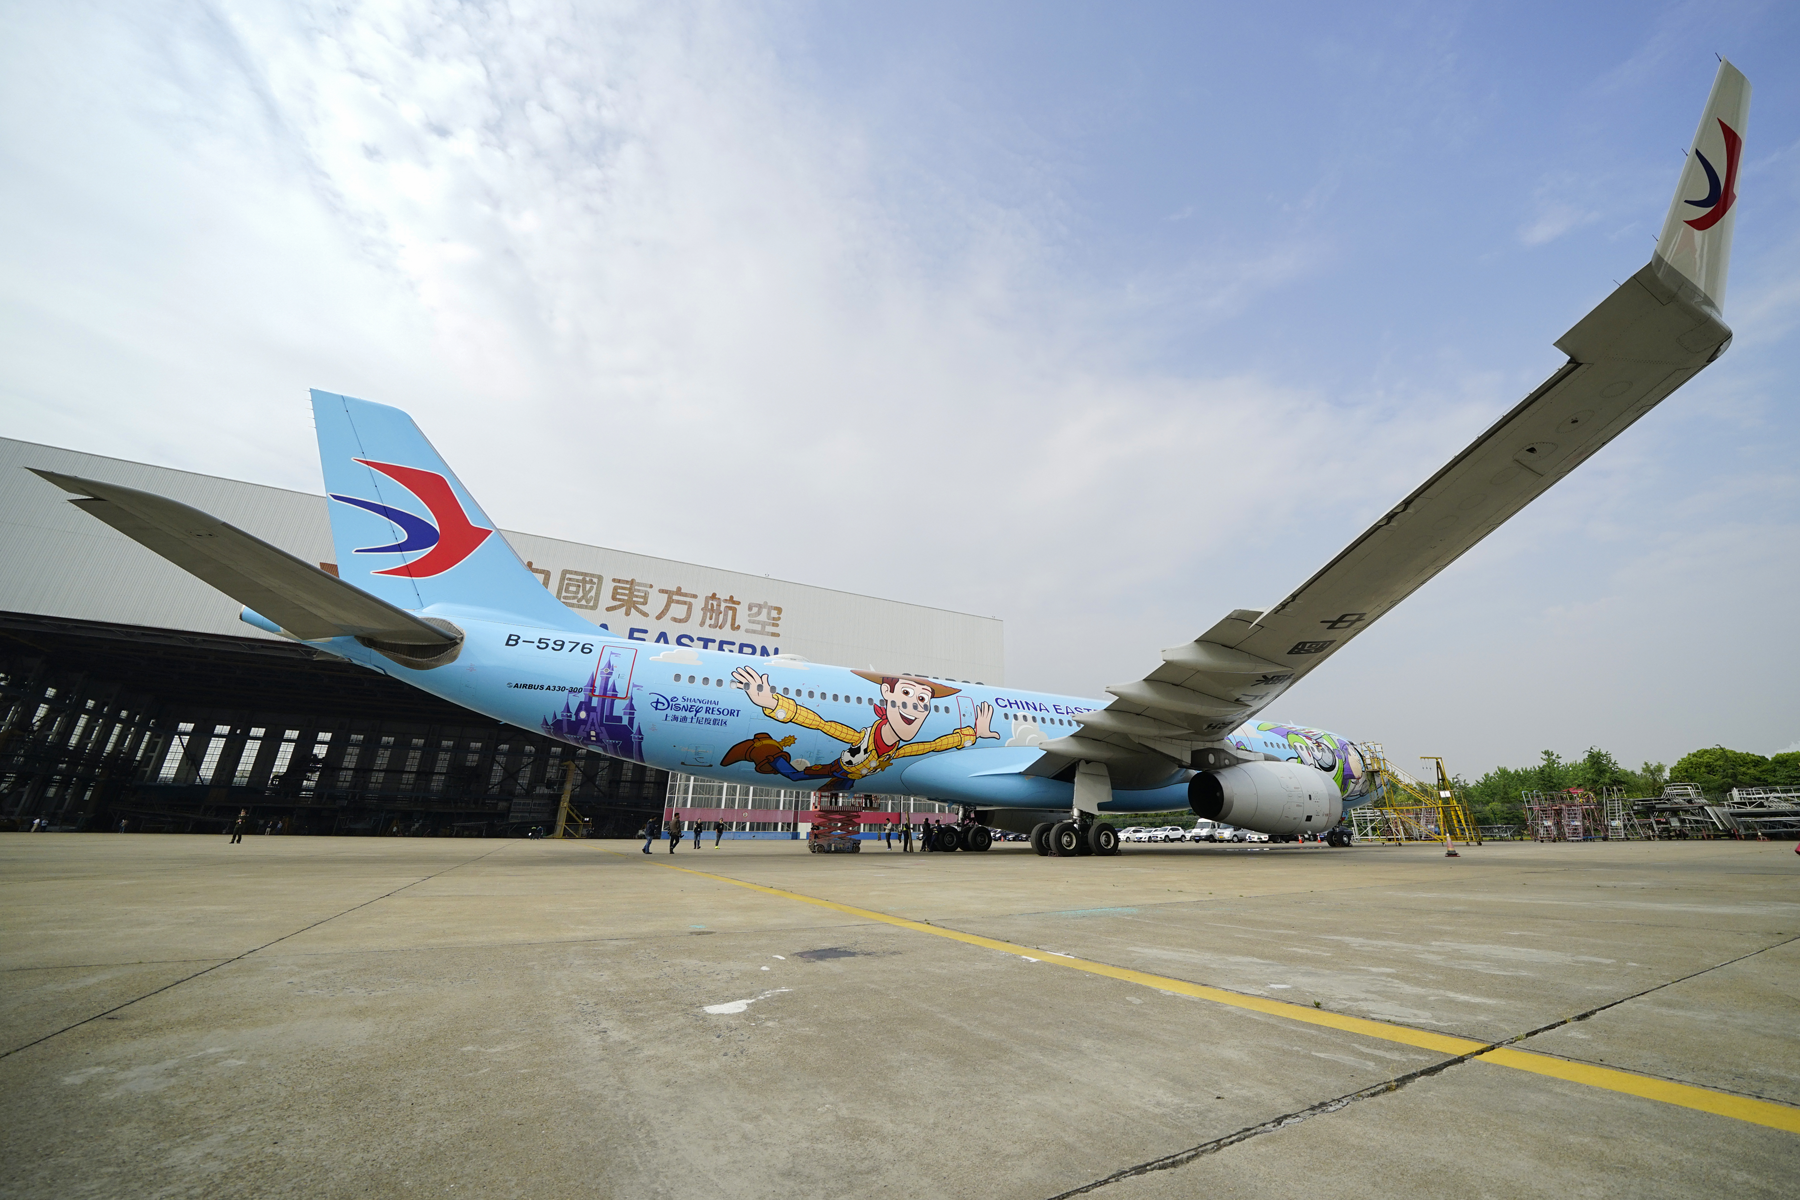 PHOTO: A Toy Story themed plane is taking off in China. The plane is a collaboration between Disney-Pixar and China Eastern Airlines. It has Buzz and Woody painted on the exterior and it  has familiar movie characters in the interior.